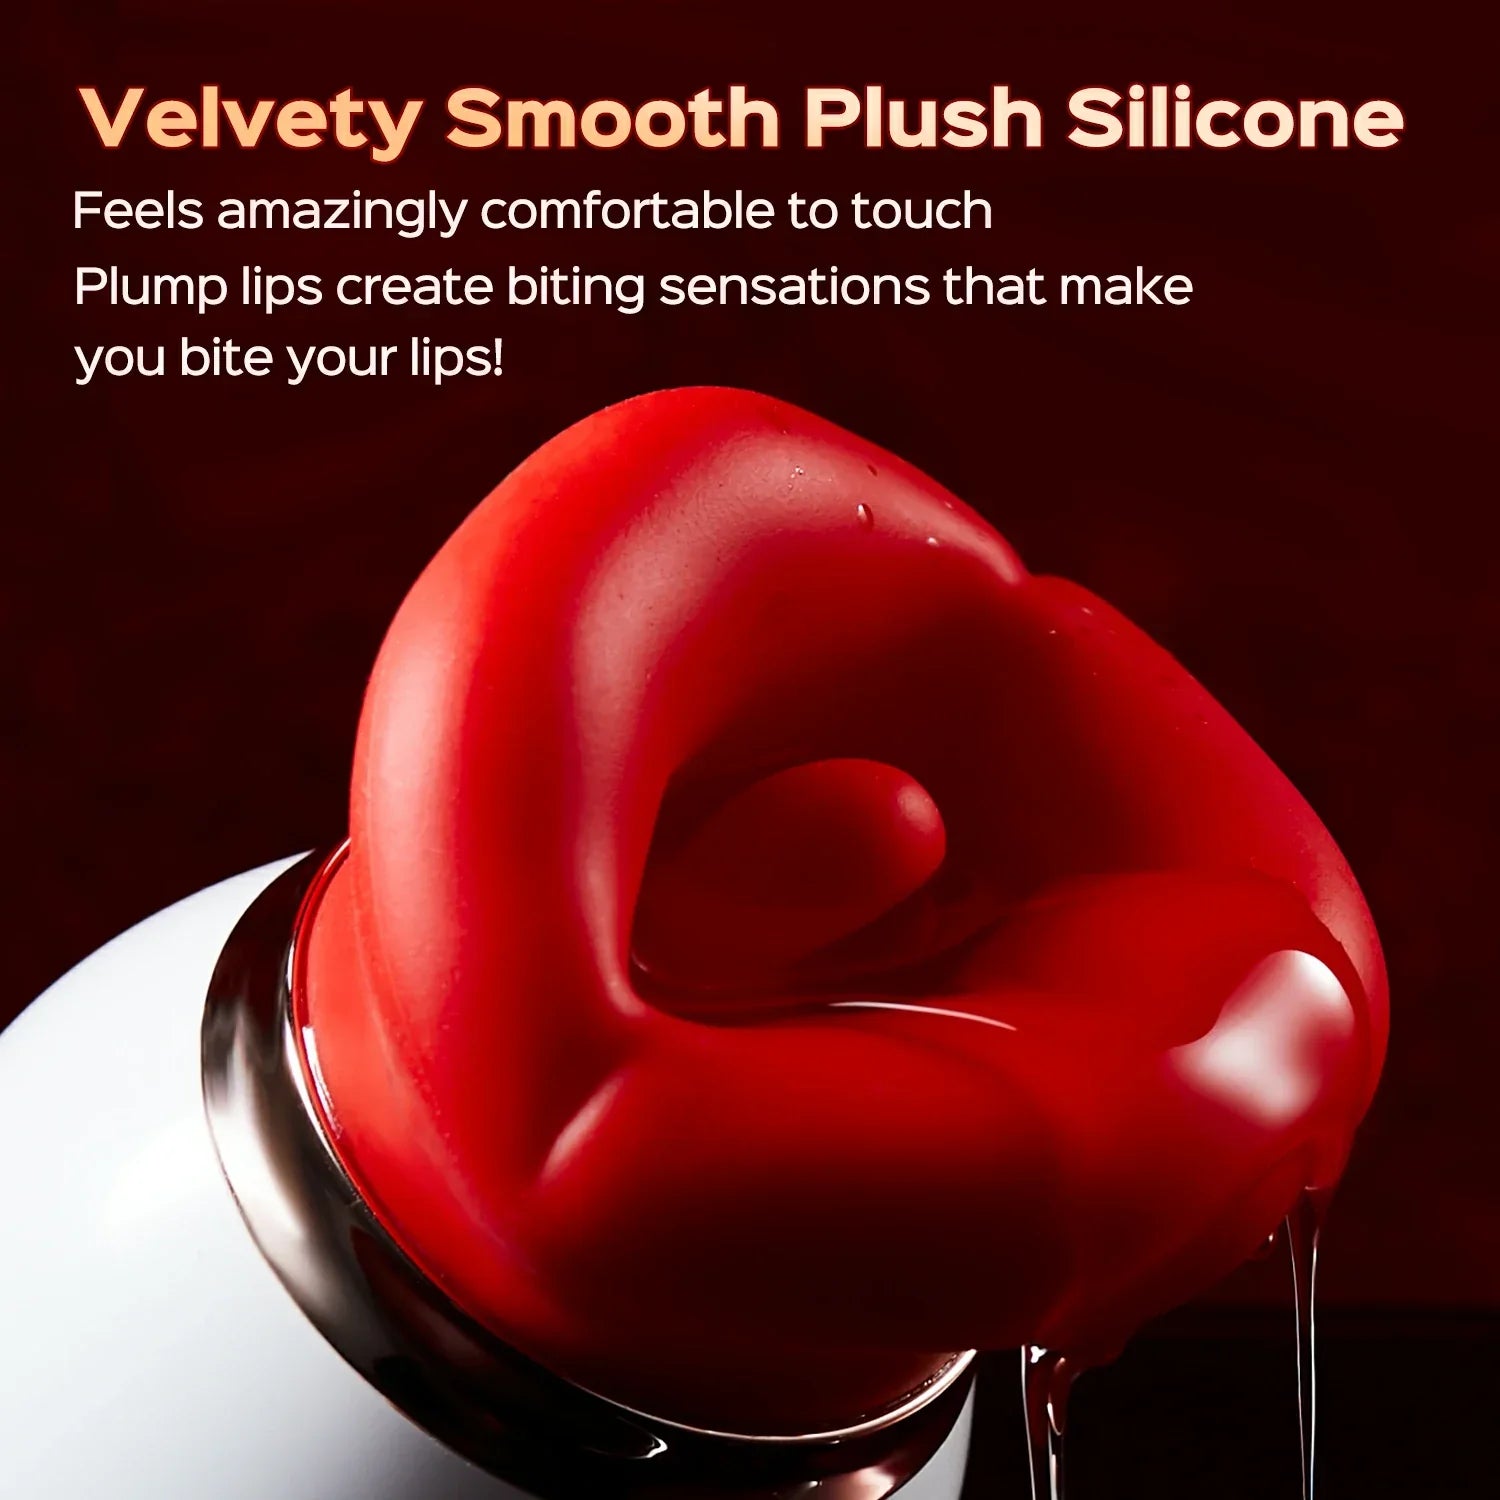 WHIRLY - 3 In 1 Mouth Shaped Sucking Vibrator 10 Tongue Licking Clit Stimulator